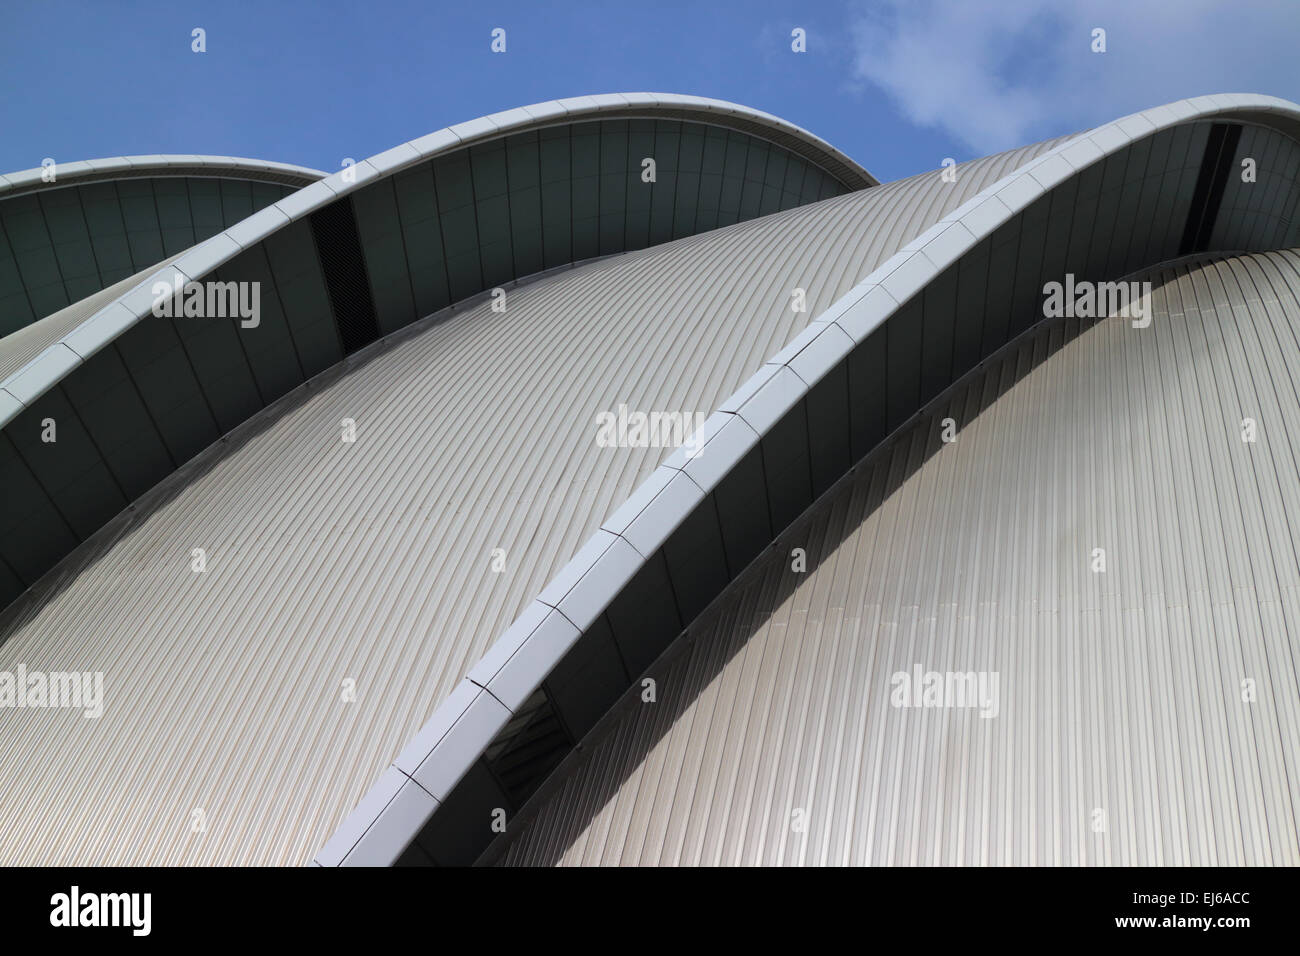 architecture of the clyde auditorium at the secc scottish exhibition and conference centre Glasgow Scotland uk Stock Photo